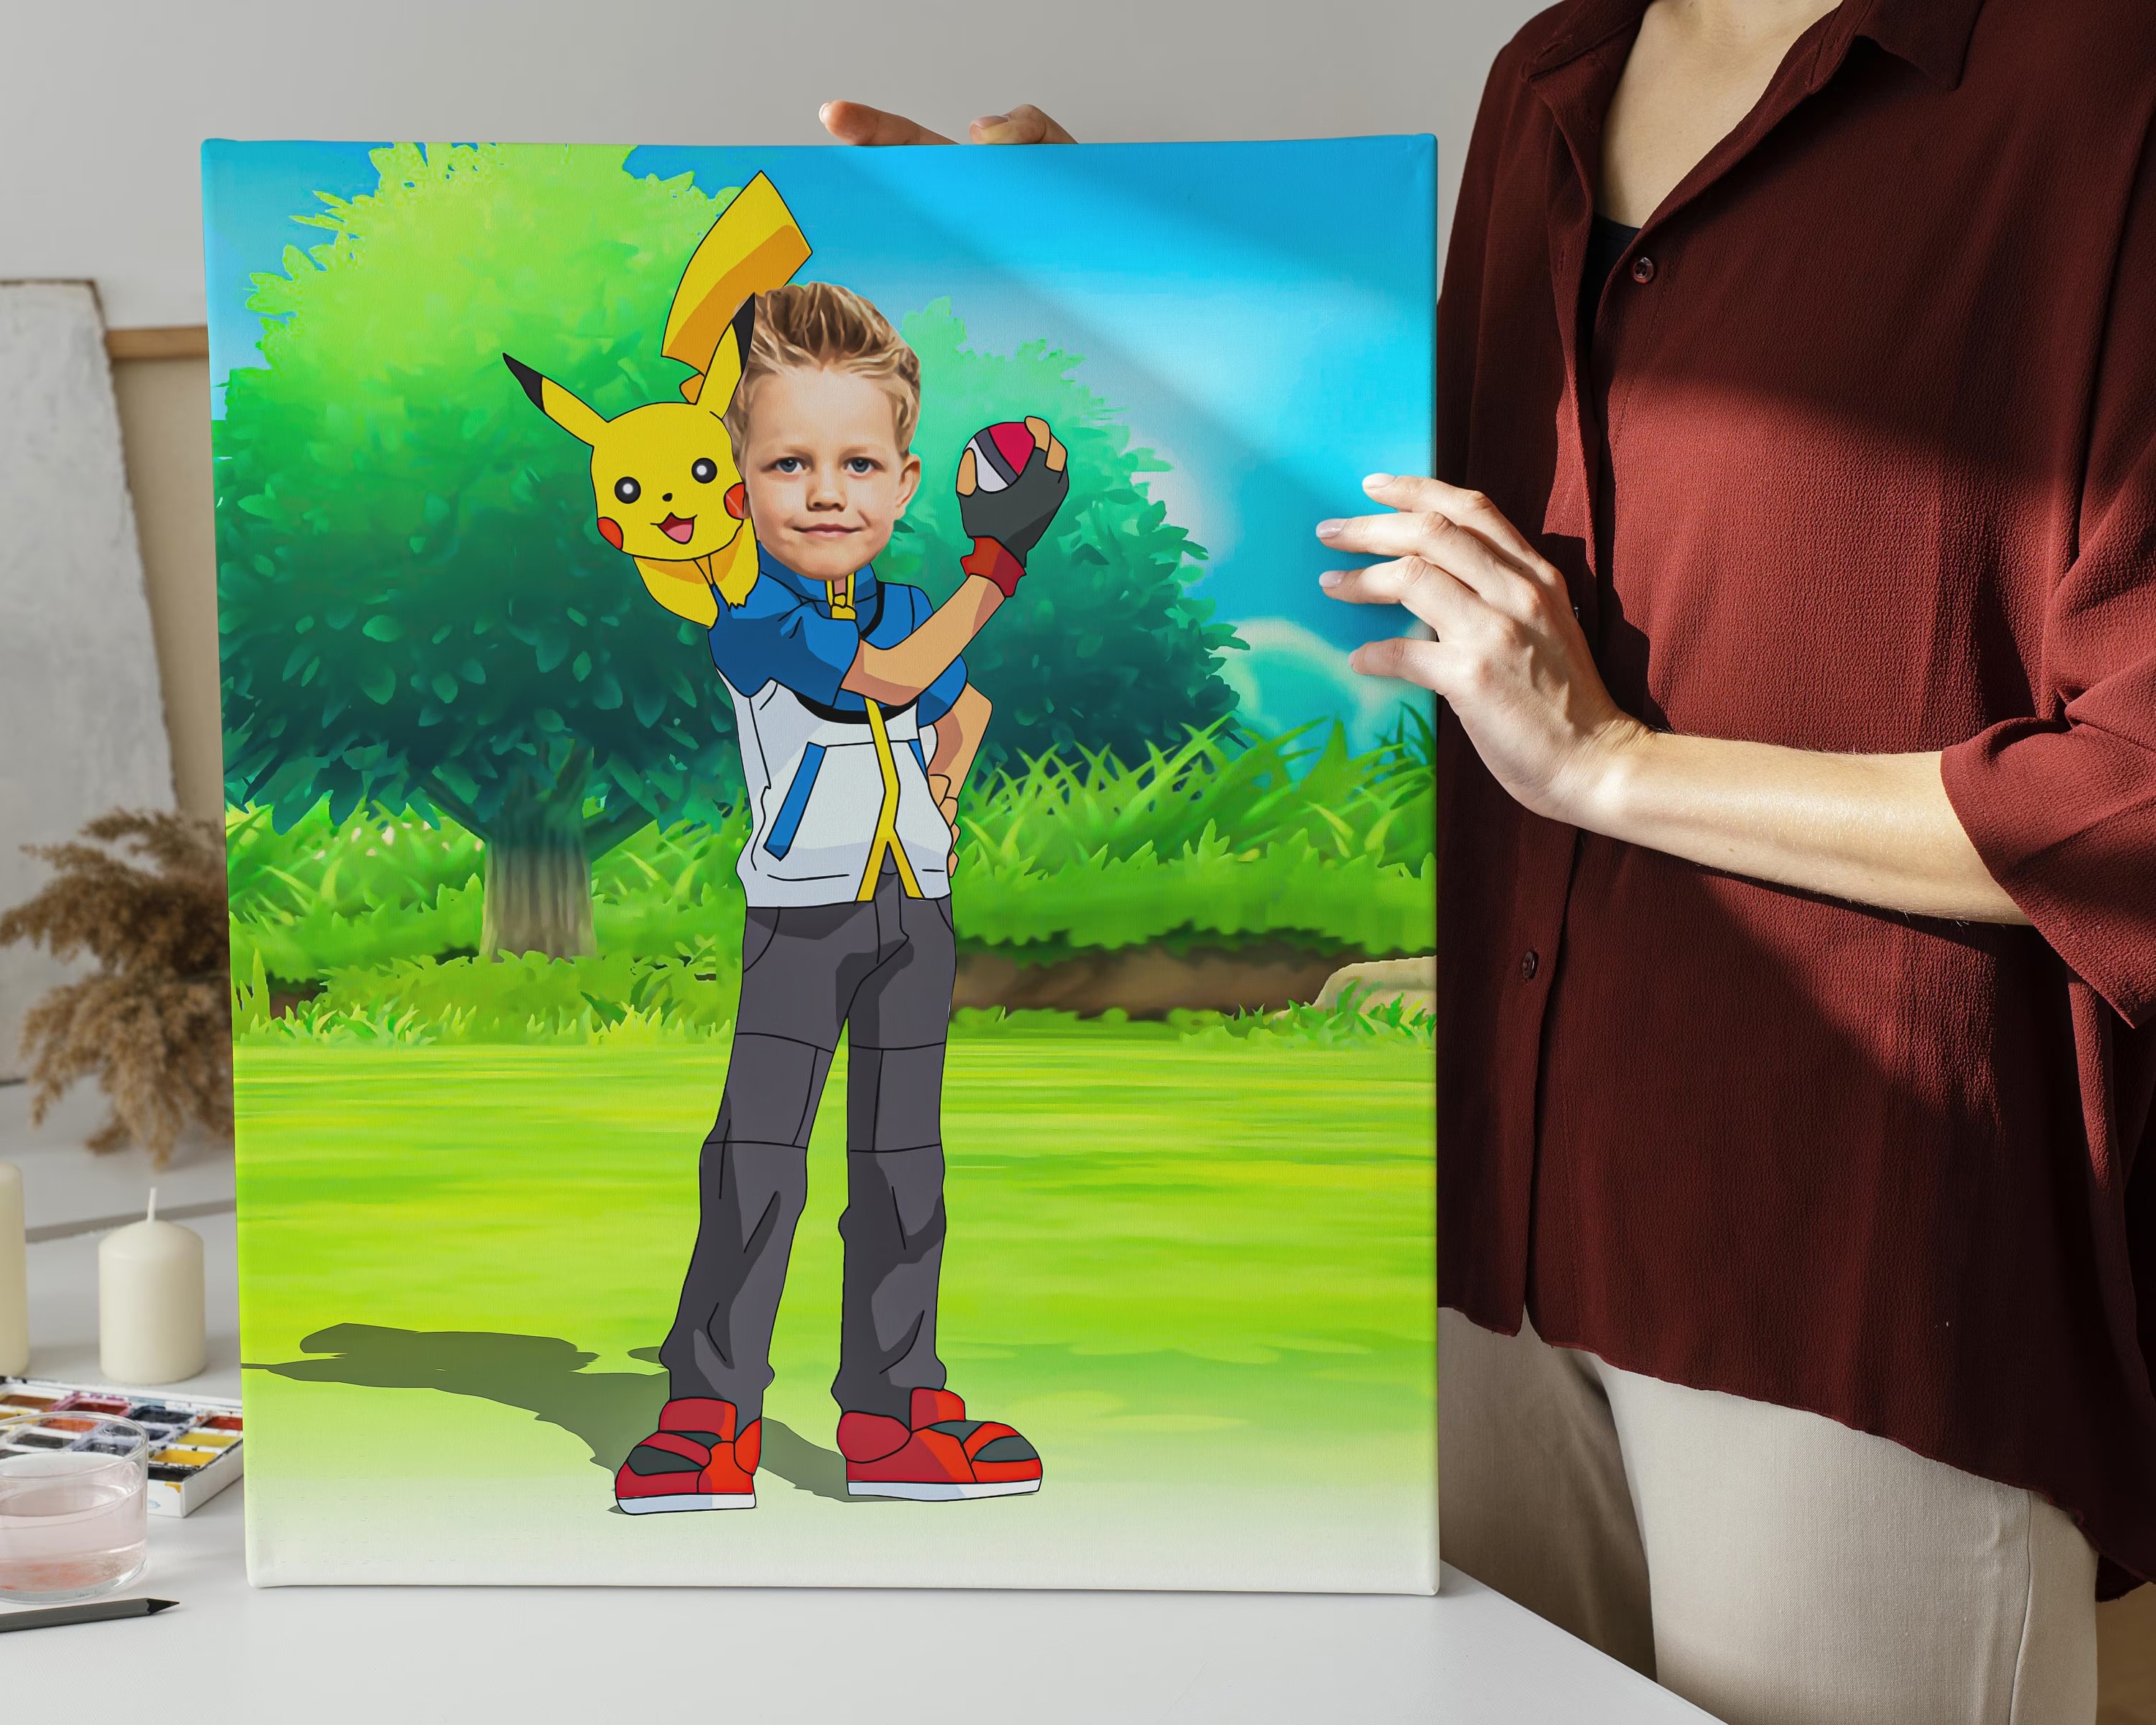 Anime Custom Portrait, Get Your Own ash ketchum Portrait from your photo, Personalized Ash caricature, Digital File Only